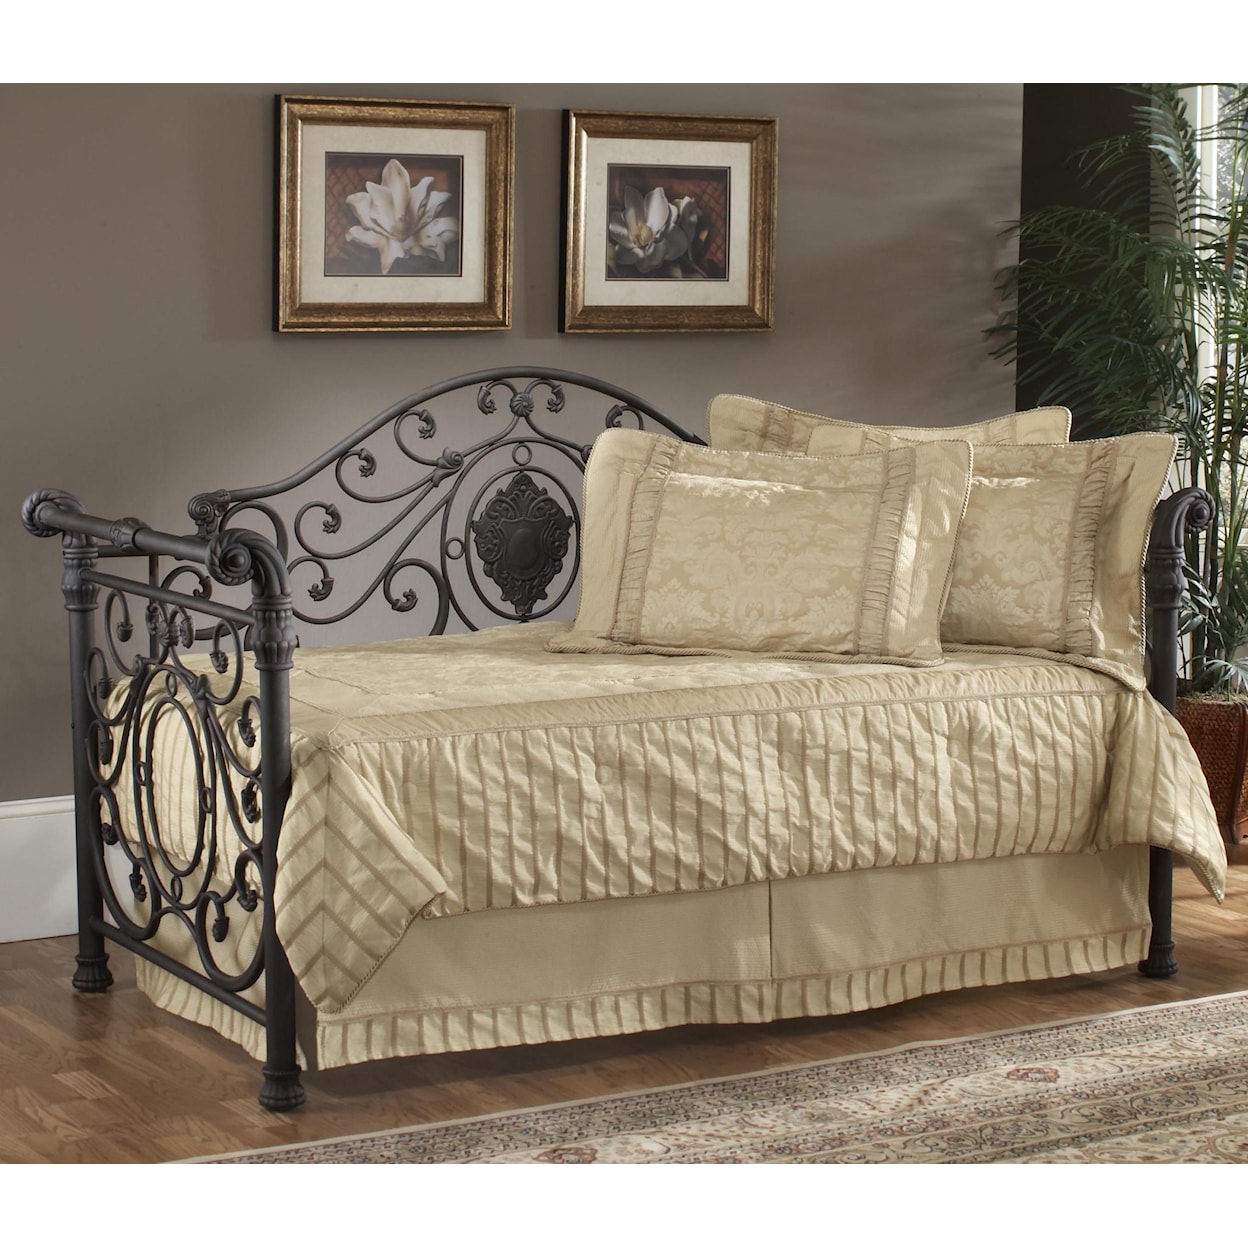 Hillsdale Daybeds Twin Mercer Daybed